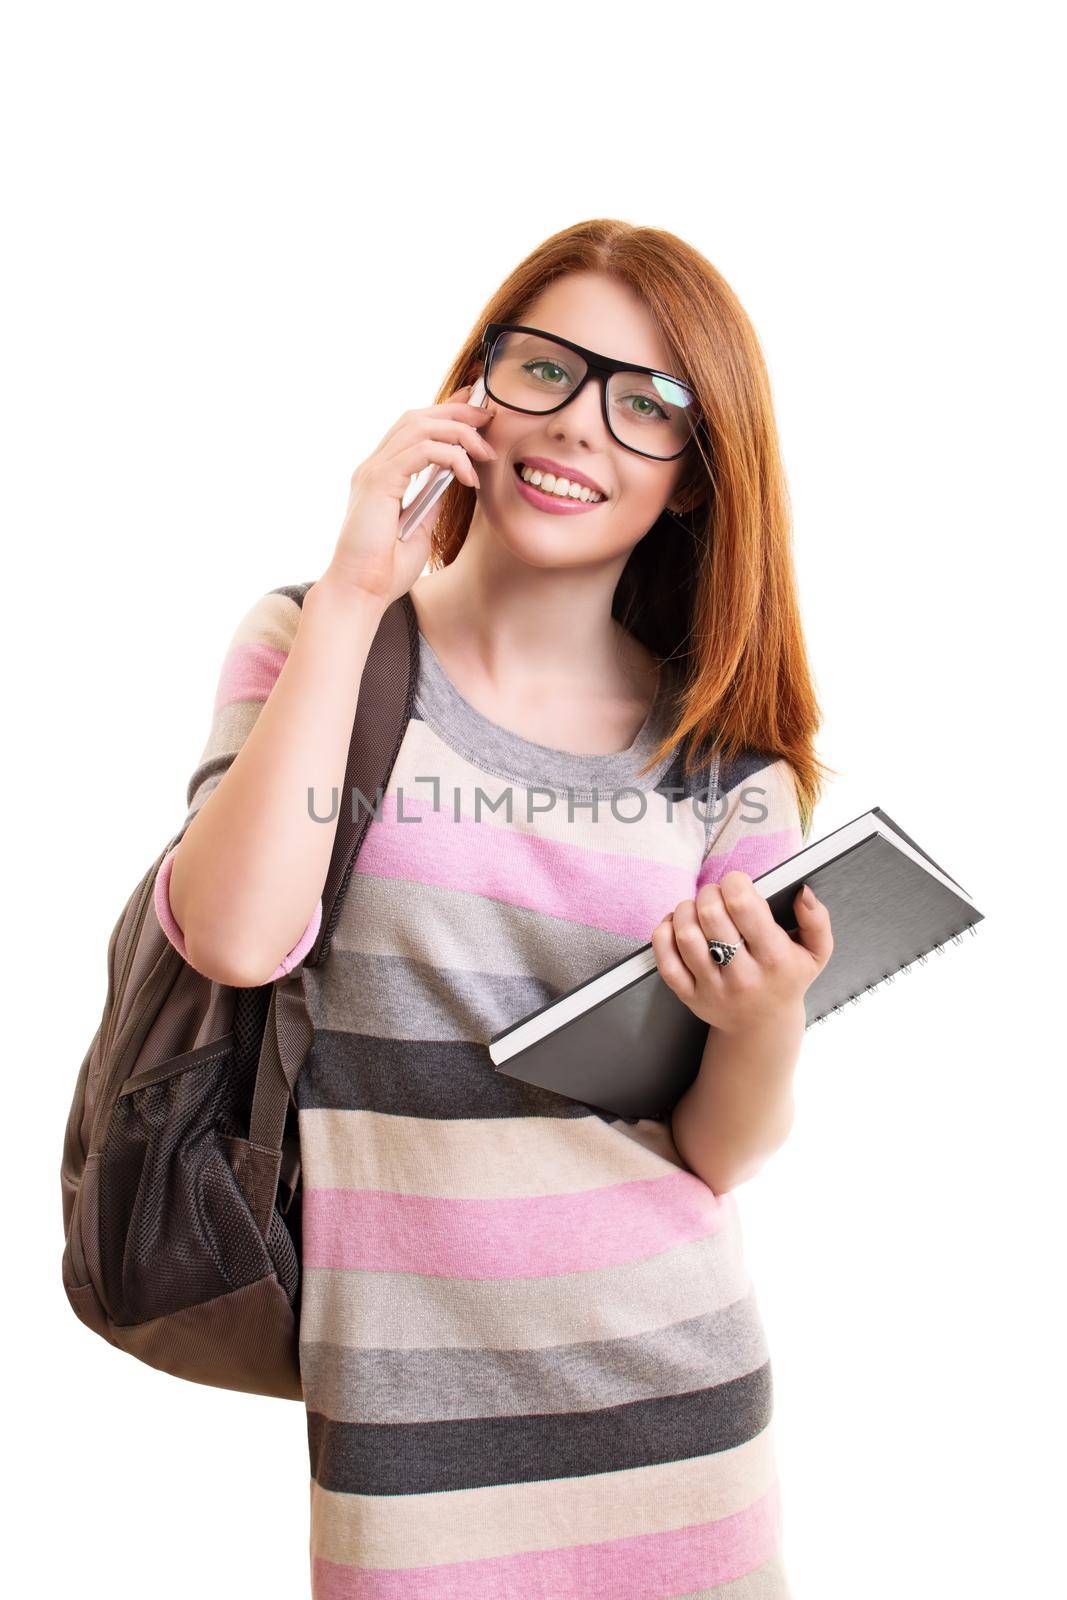 Smiling young fashionable female student with backpack holding a notebook and talking on a mobile phone, isolated on white background. Education and back to school concept. Technology and communication concept.